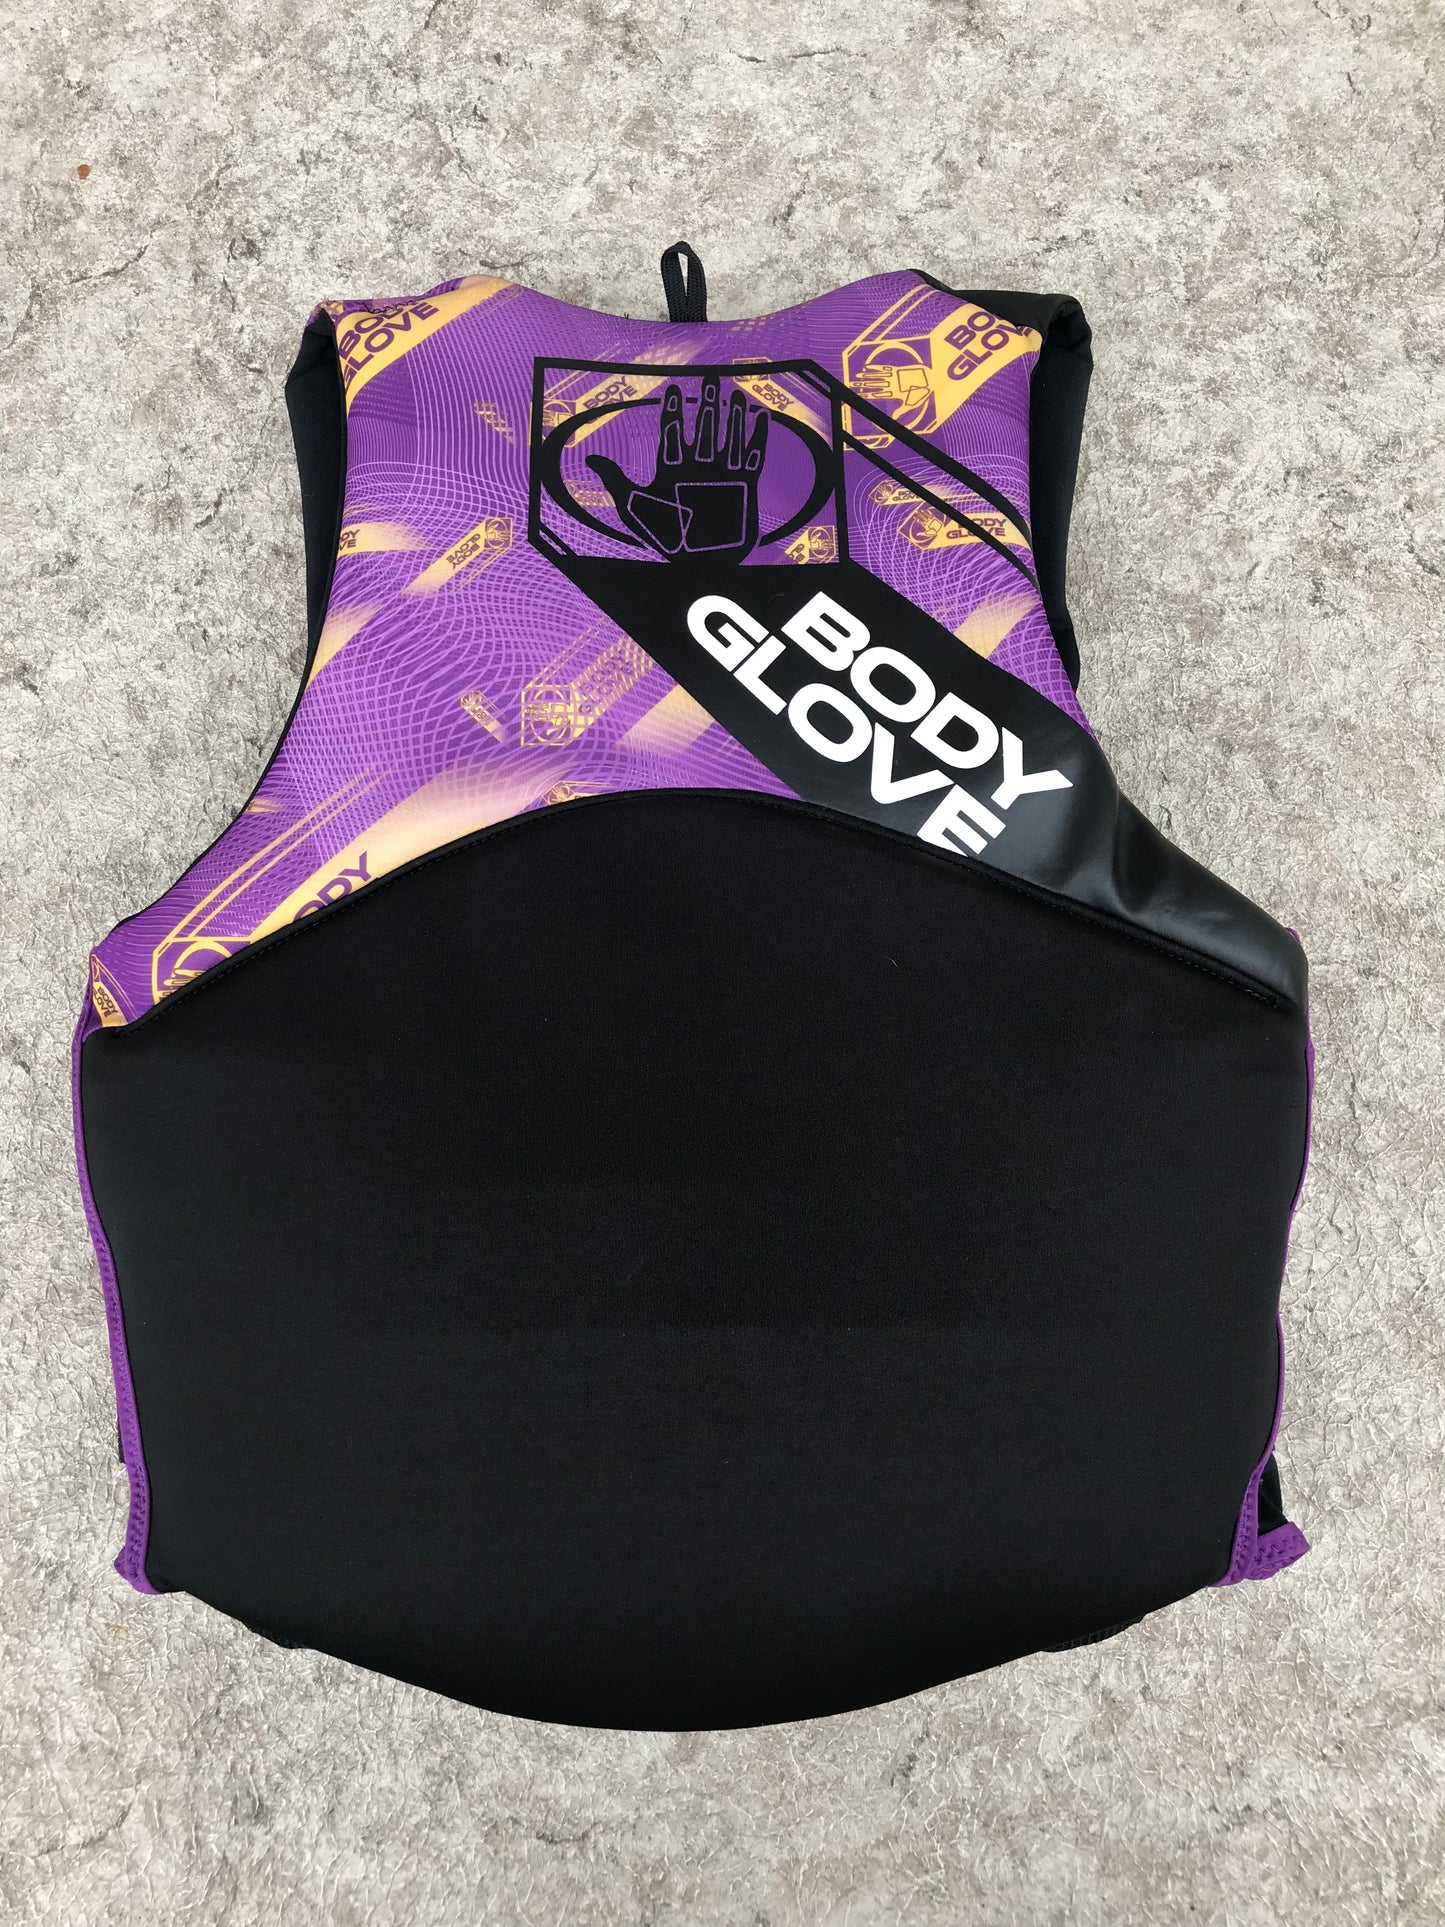 Life Jacket Adult Size Small Body Glove Neoprene Purple and Black Excellent